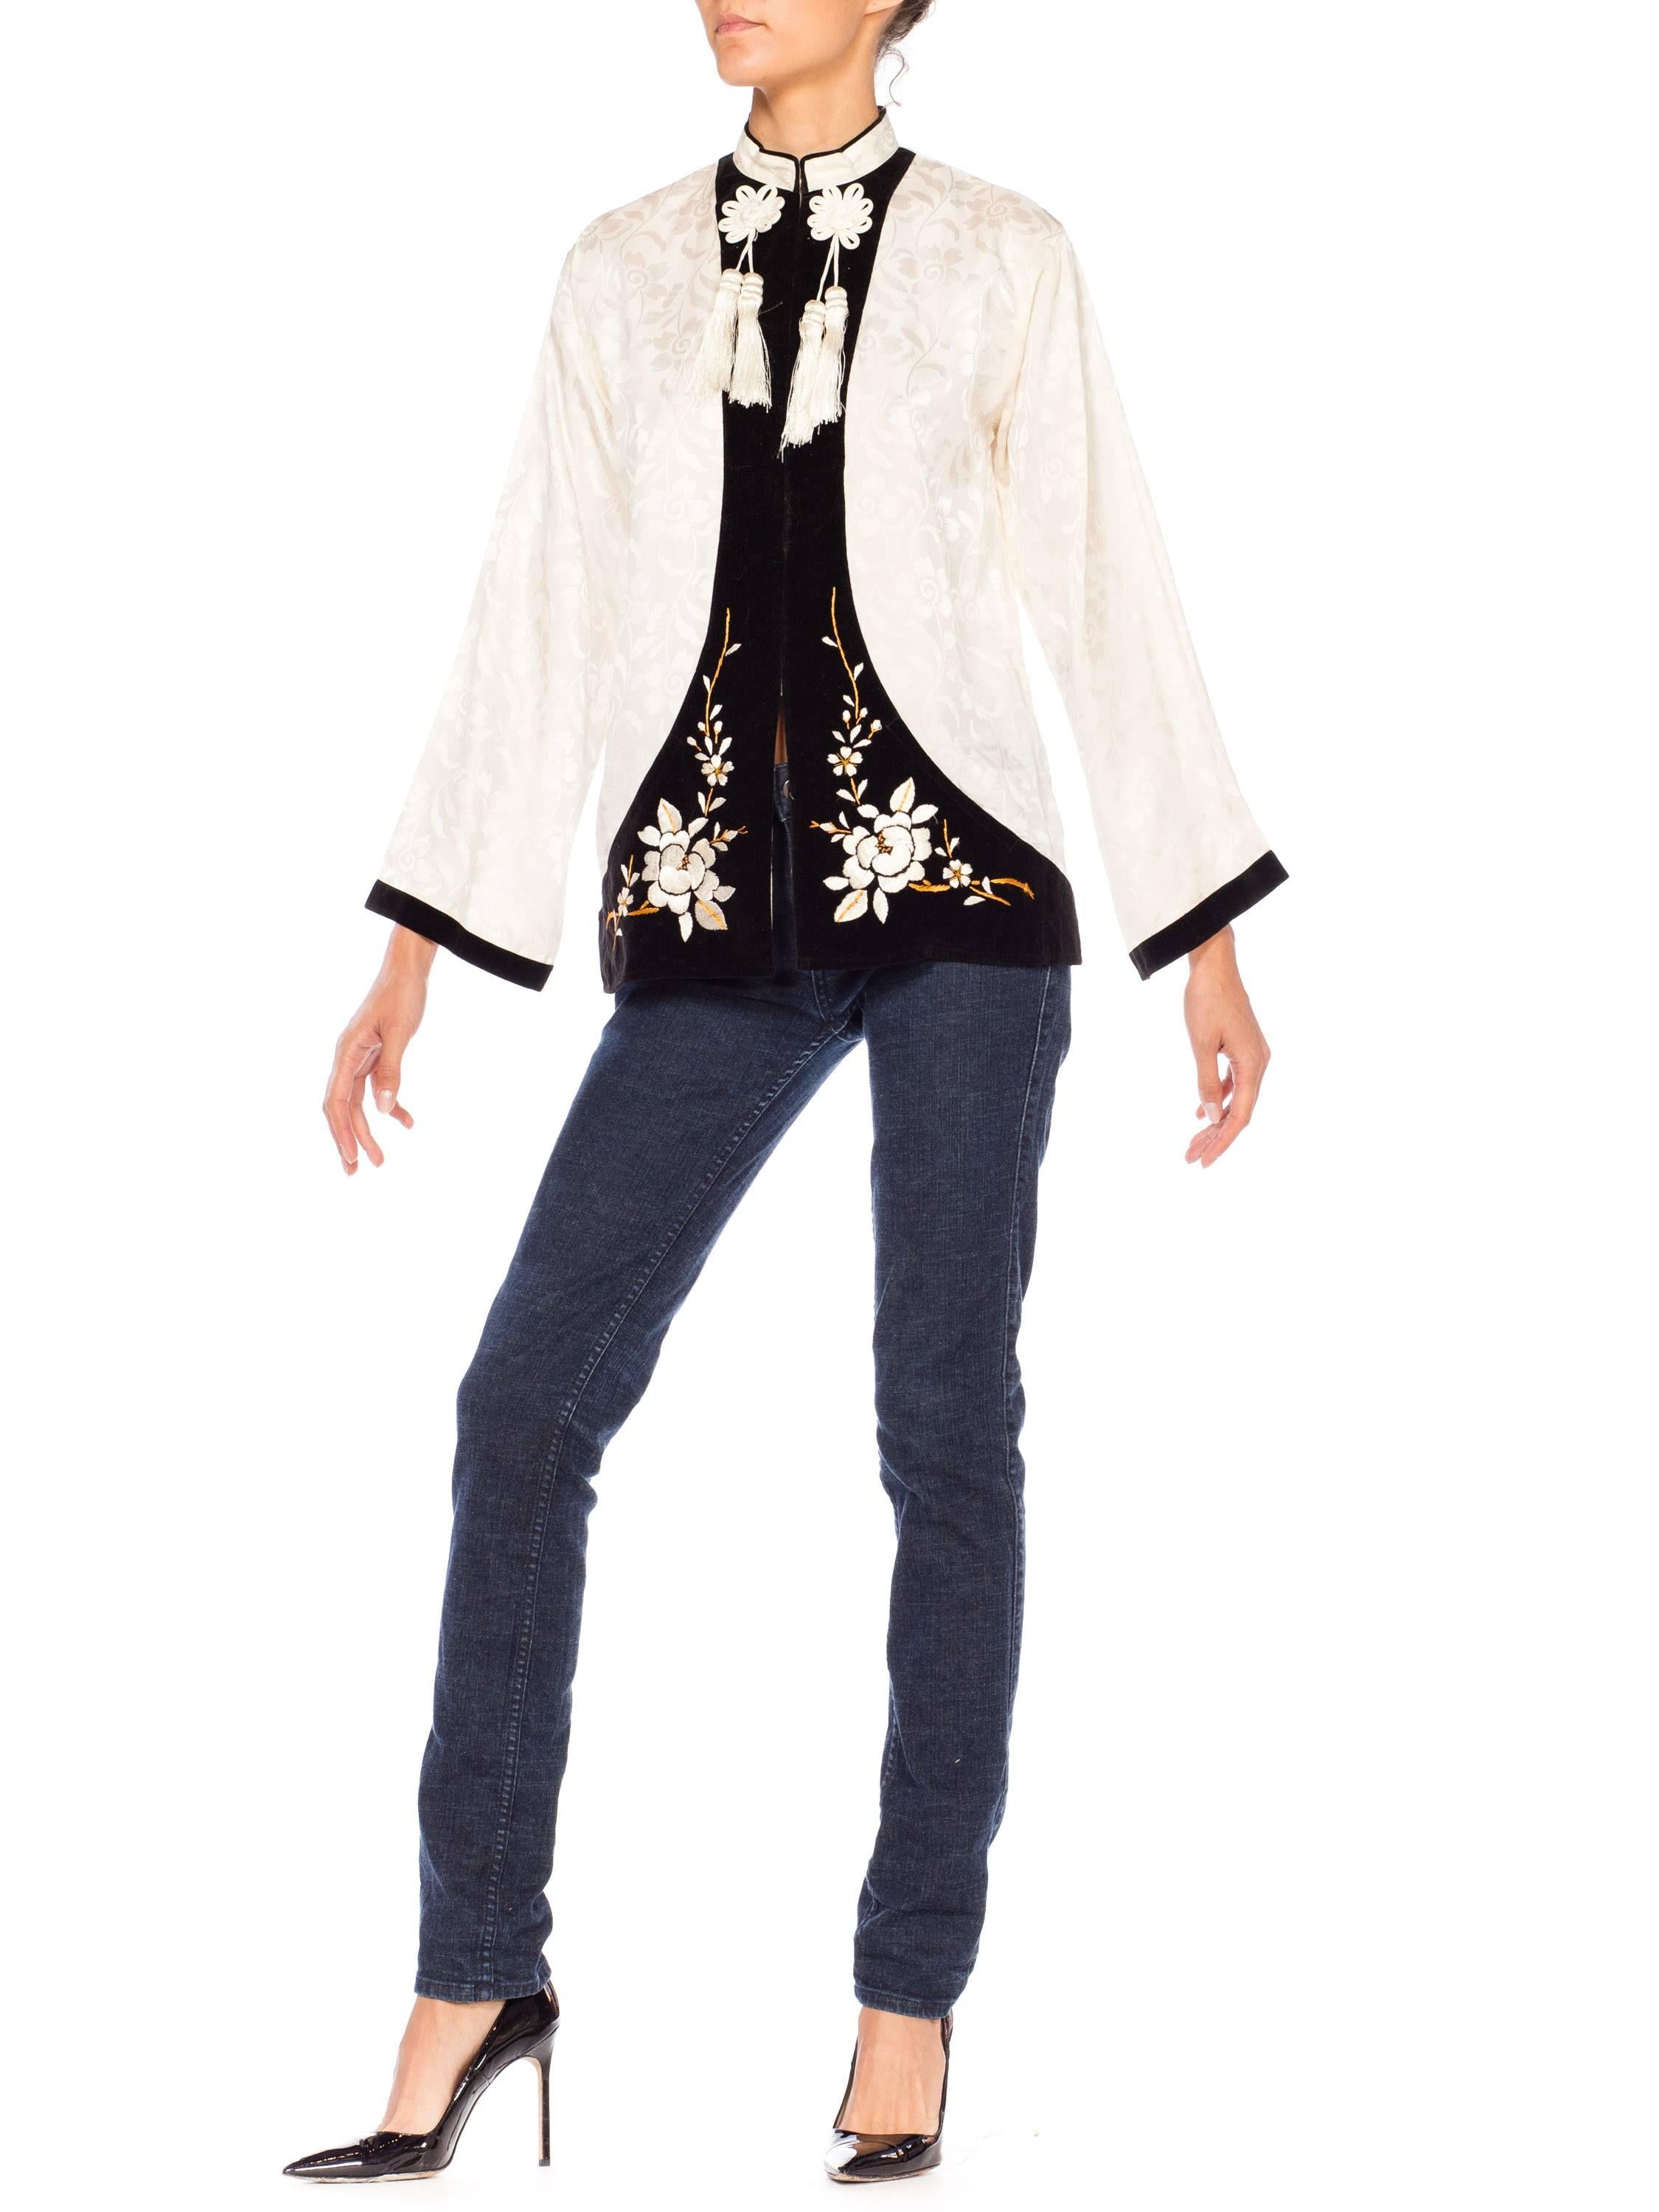 White 1940s Embroidered Satin and Velvet Chinese Jacket with Tassels